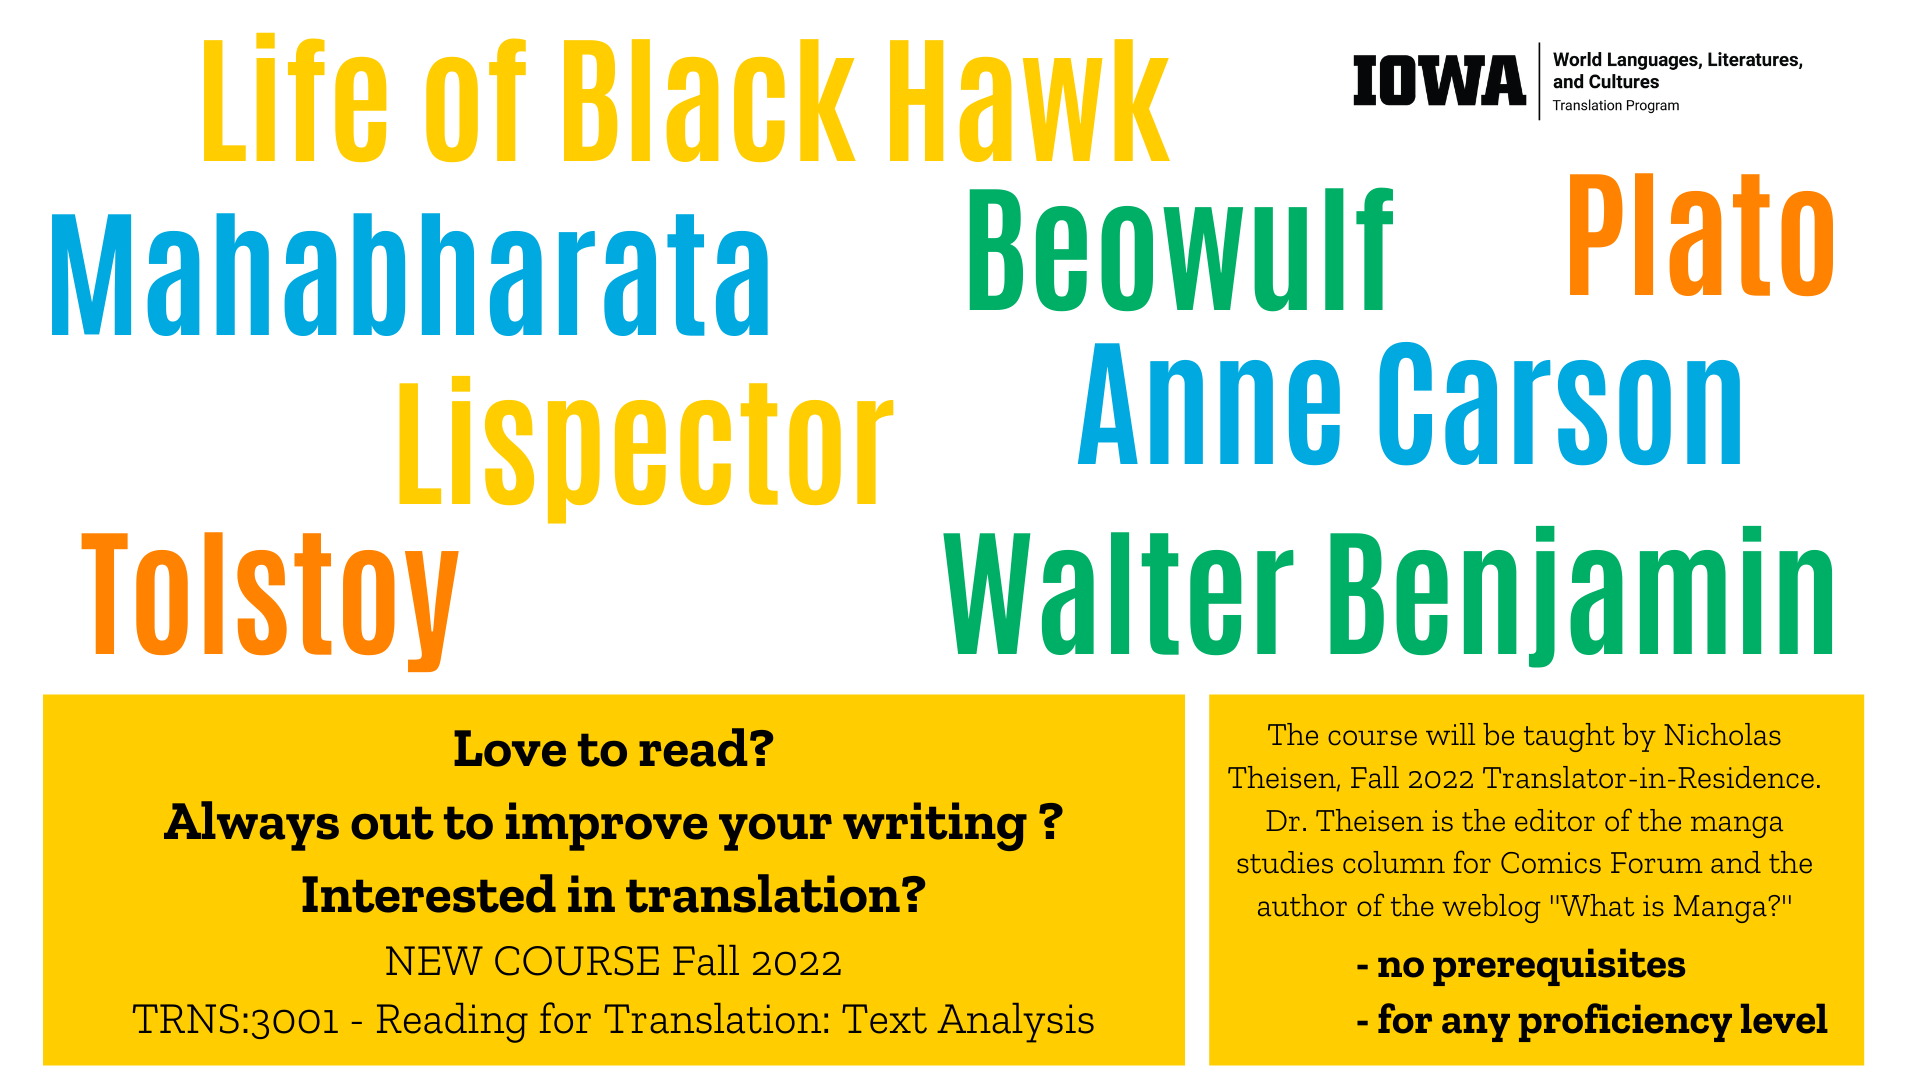 Life of Blackhawk Mahabharata Beowulf Plato Lispector Anne Carson Tolstoy Walter Benjamin Love to read? Always out to improve your writing ? Interested in translation? NEW COURSE Fall 2022 TRNS:3001 - Reading for Translation: Text Analysis The course will be taught by Nicholas Theisen, Fall 2022 Translator-in-Residence. Dr. Theisen is the editor of the manga studies column for Comics Forum and the author of the weblog "What is Manga?" no prerequisites for any proficiency level